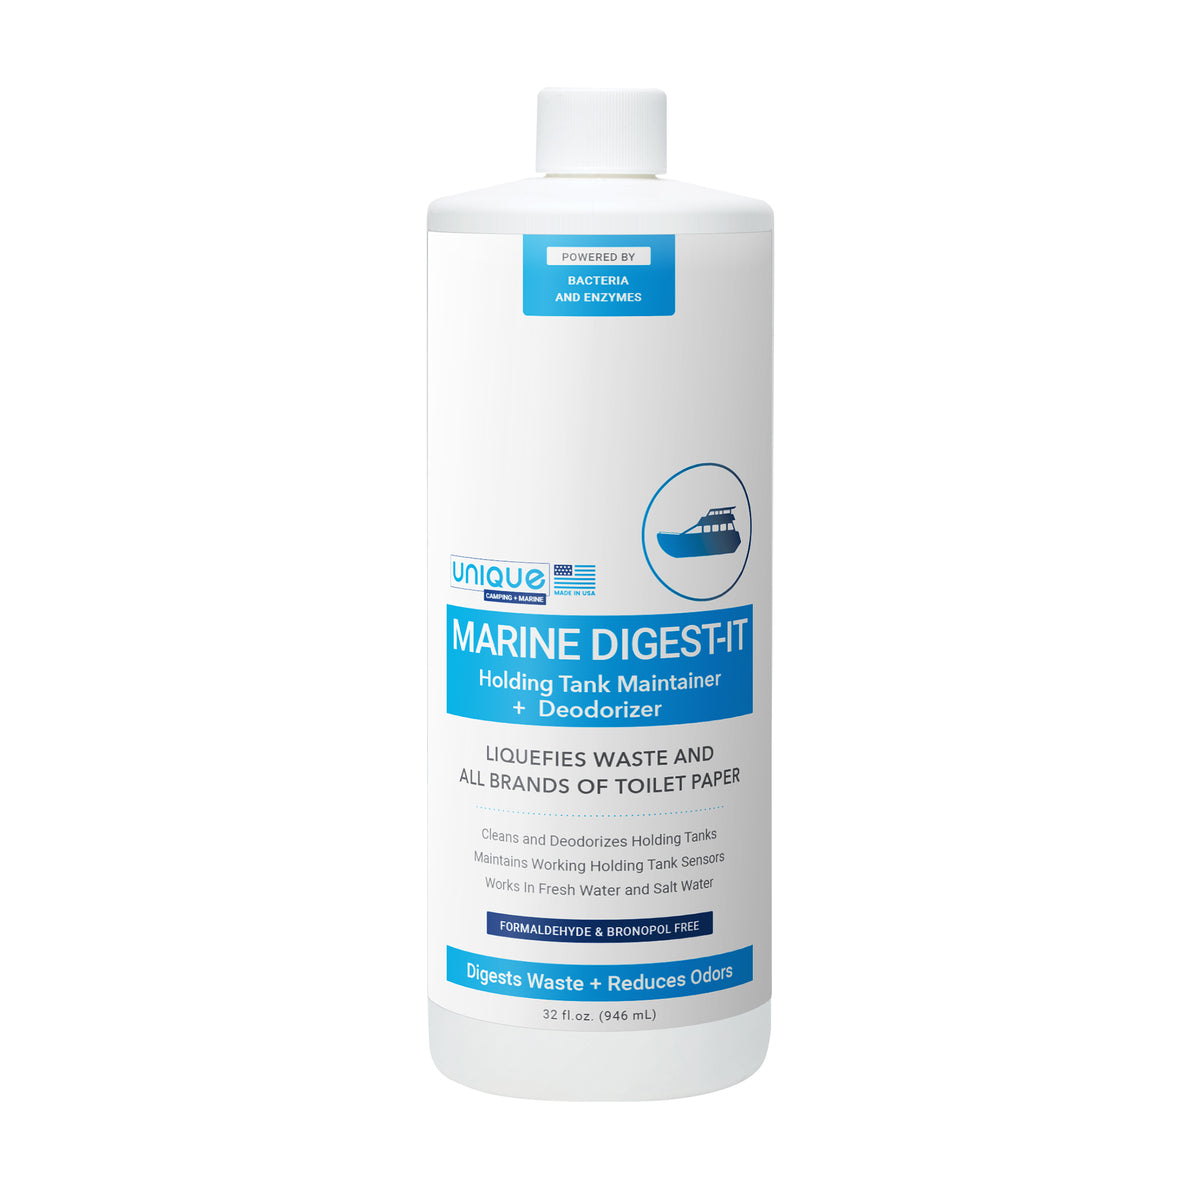 Marine Digest-It 32 oz. Boat Holding Tank Maintainer and deodorizer New Packaging.